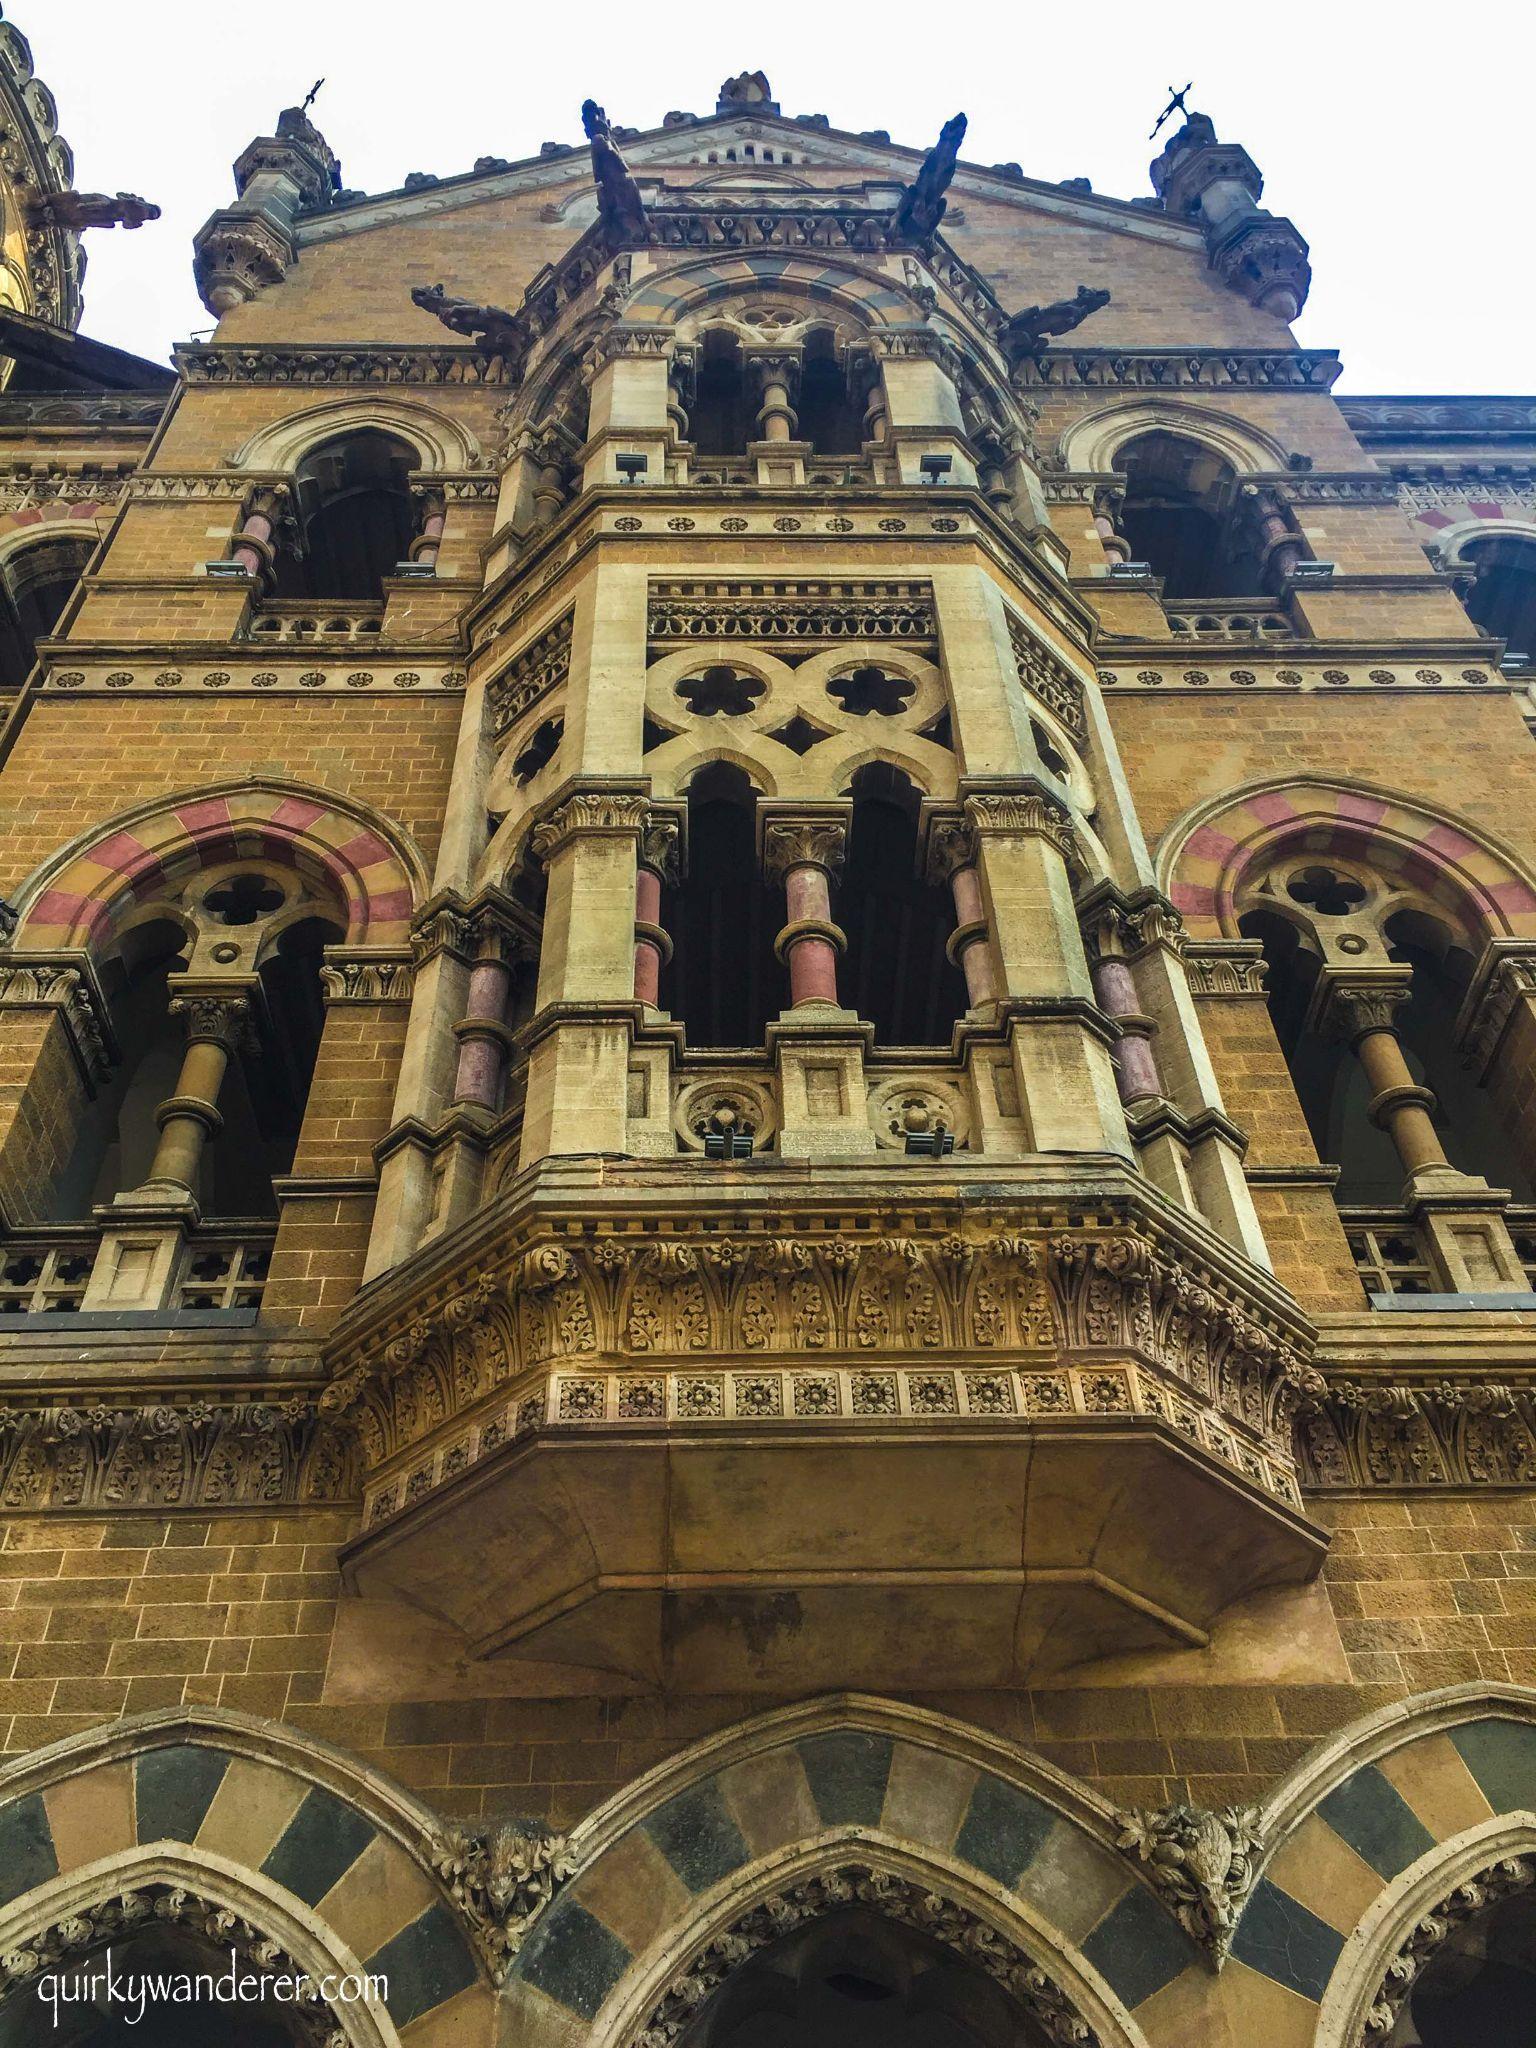 Museums of the World: CSMT Heritage Museum - Sheet5